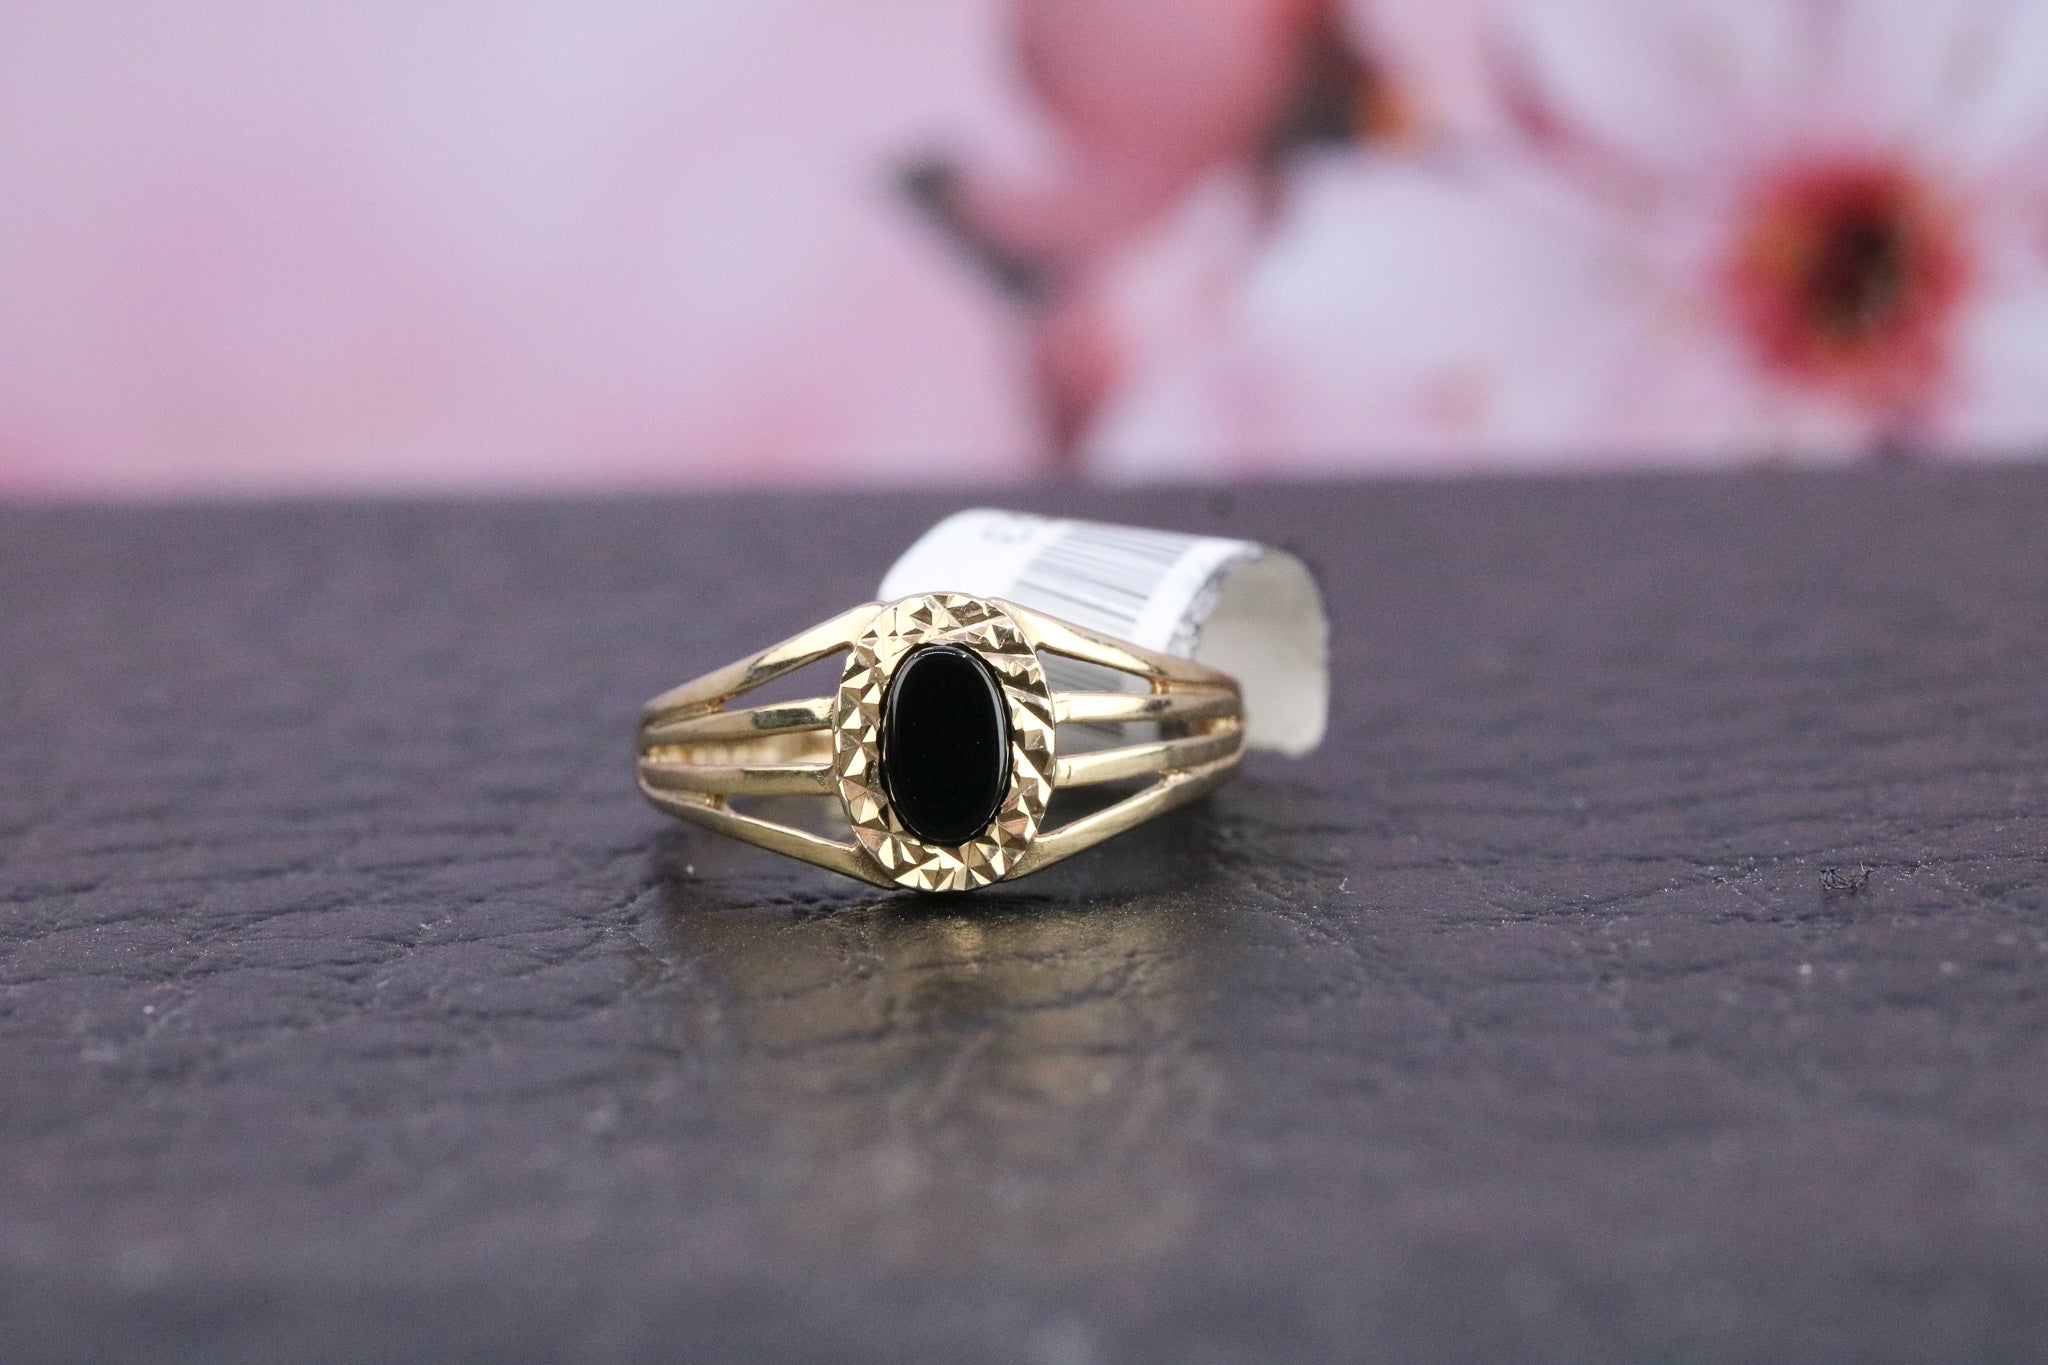 9ct Gold Onyx Ring - CO1353 - Hallmark Jewellers Formby & The Jewellers Bench Widnes